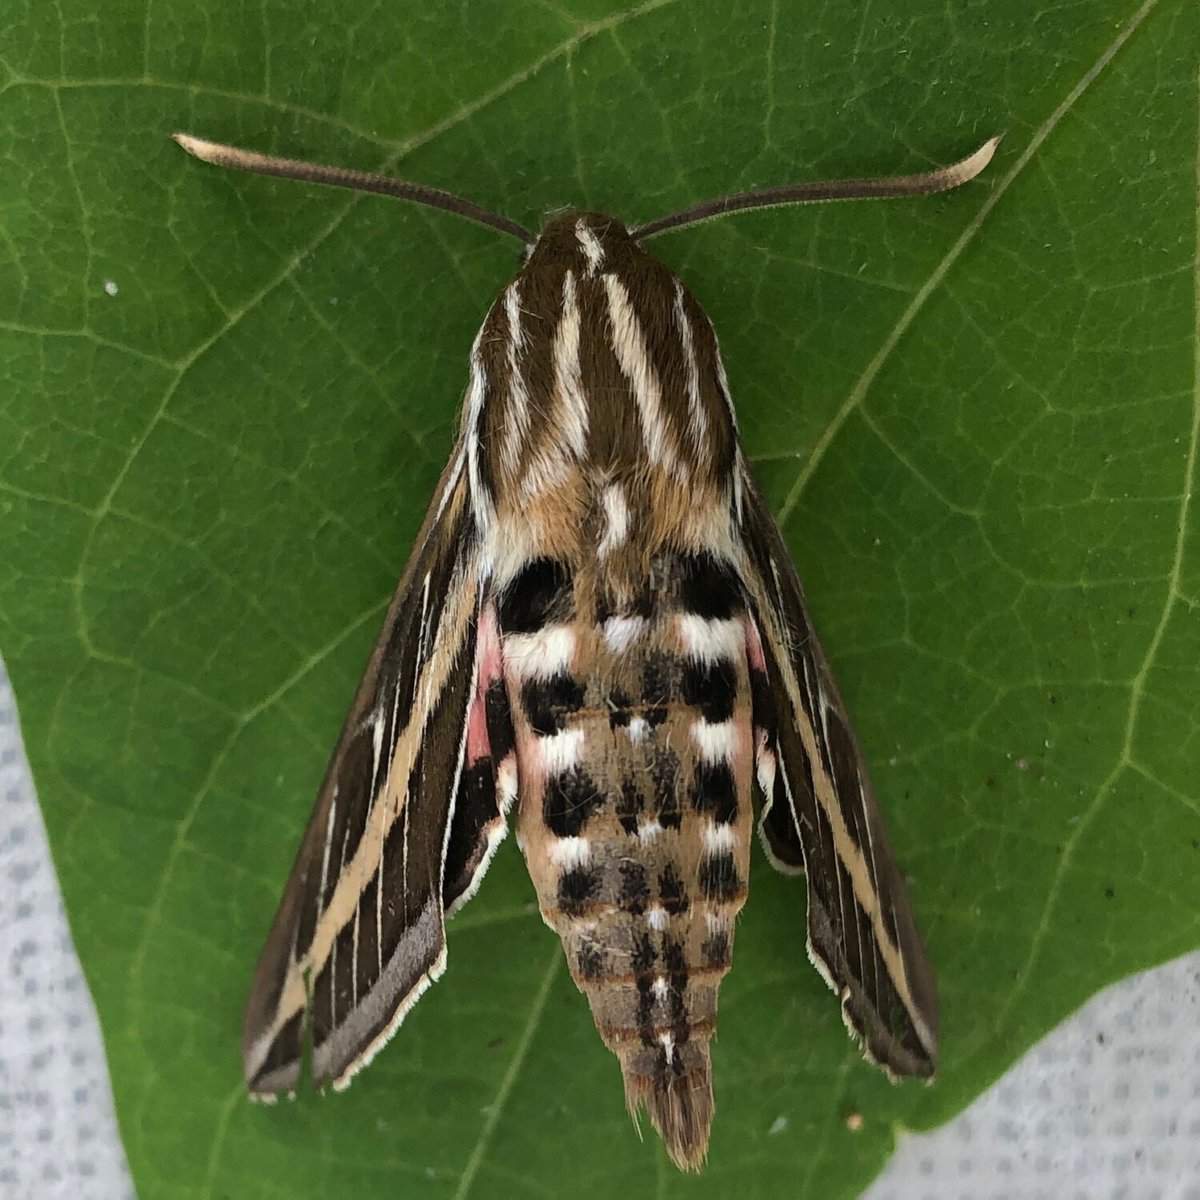 the sphinx moth has intricate markings of white, brown and black lines and dots with some pink under the wings.